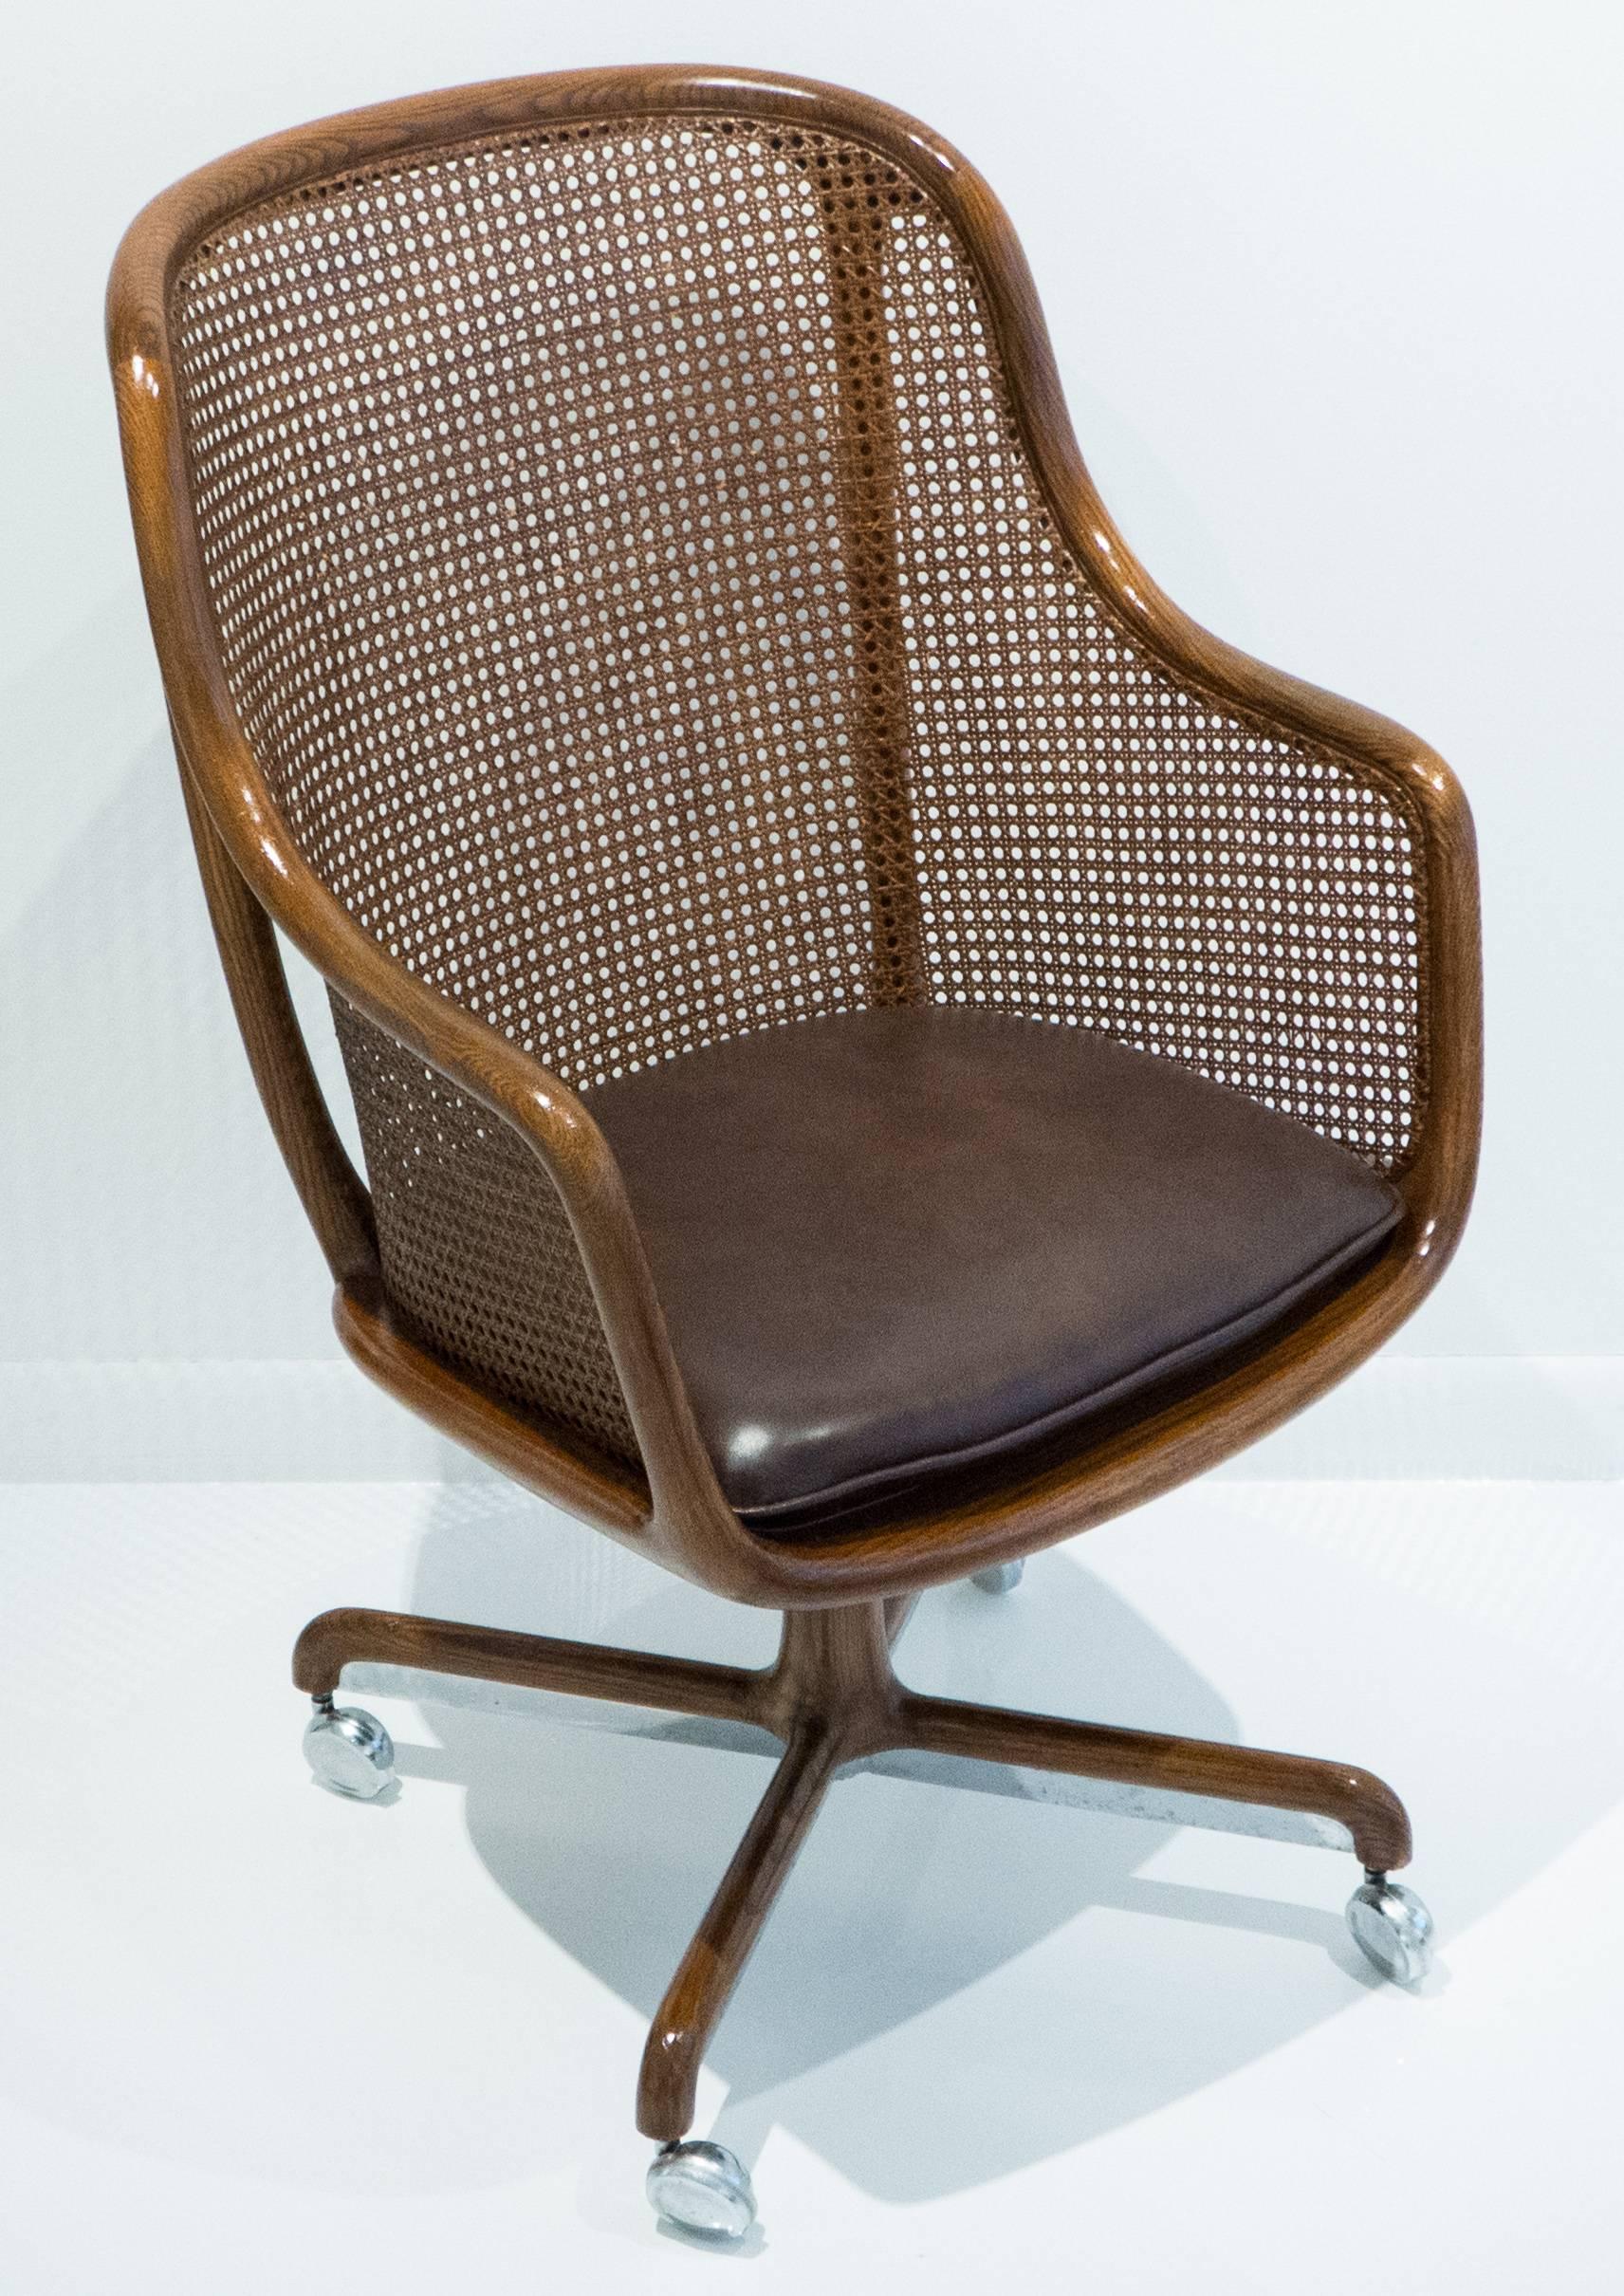 Adjustable, tilt-back office armchair, designed by Ward Bennett for Brickel Associates, circa 1975. Sinuous solid oak frame with original caning, chrome runners and new leather seat cushion. Retains original paper label.